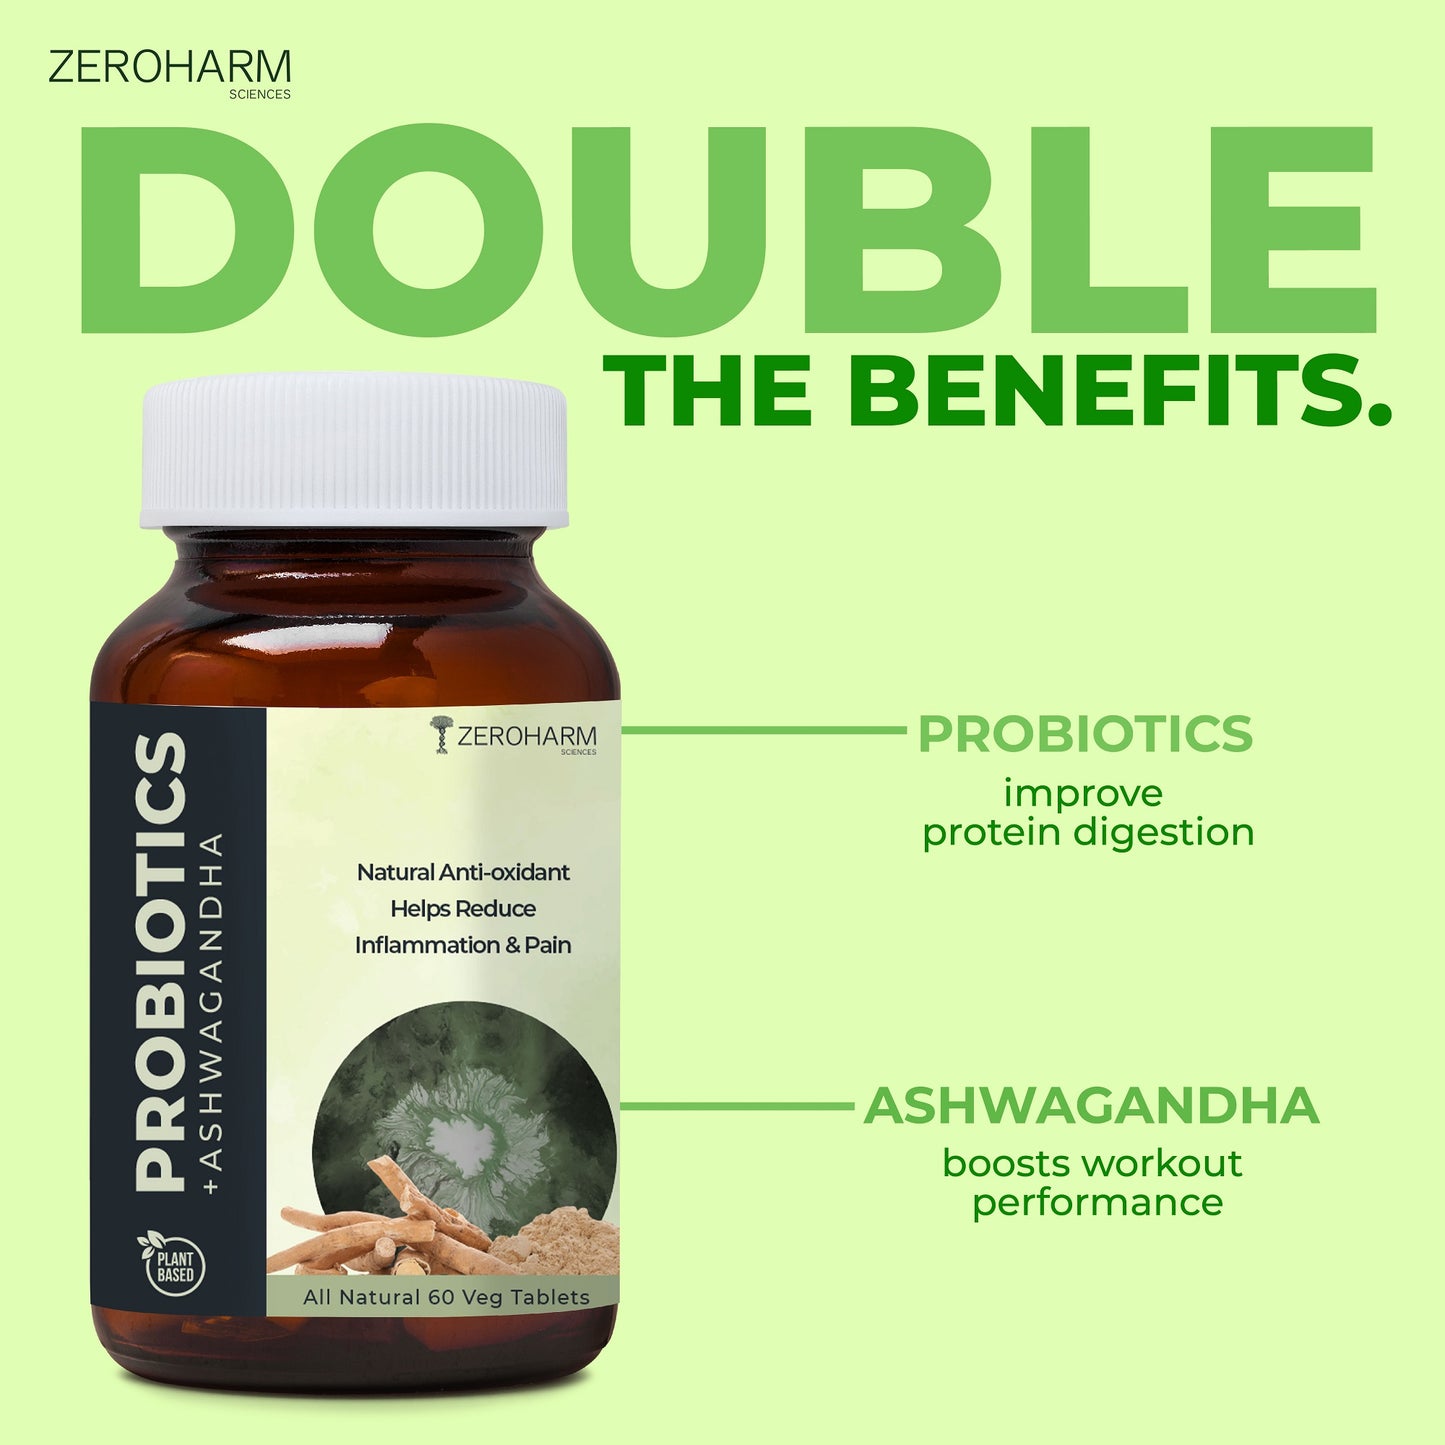 probiotic with ashwagandha helps with protein digestion and workout performance